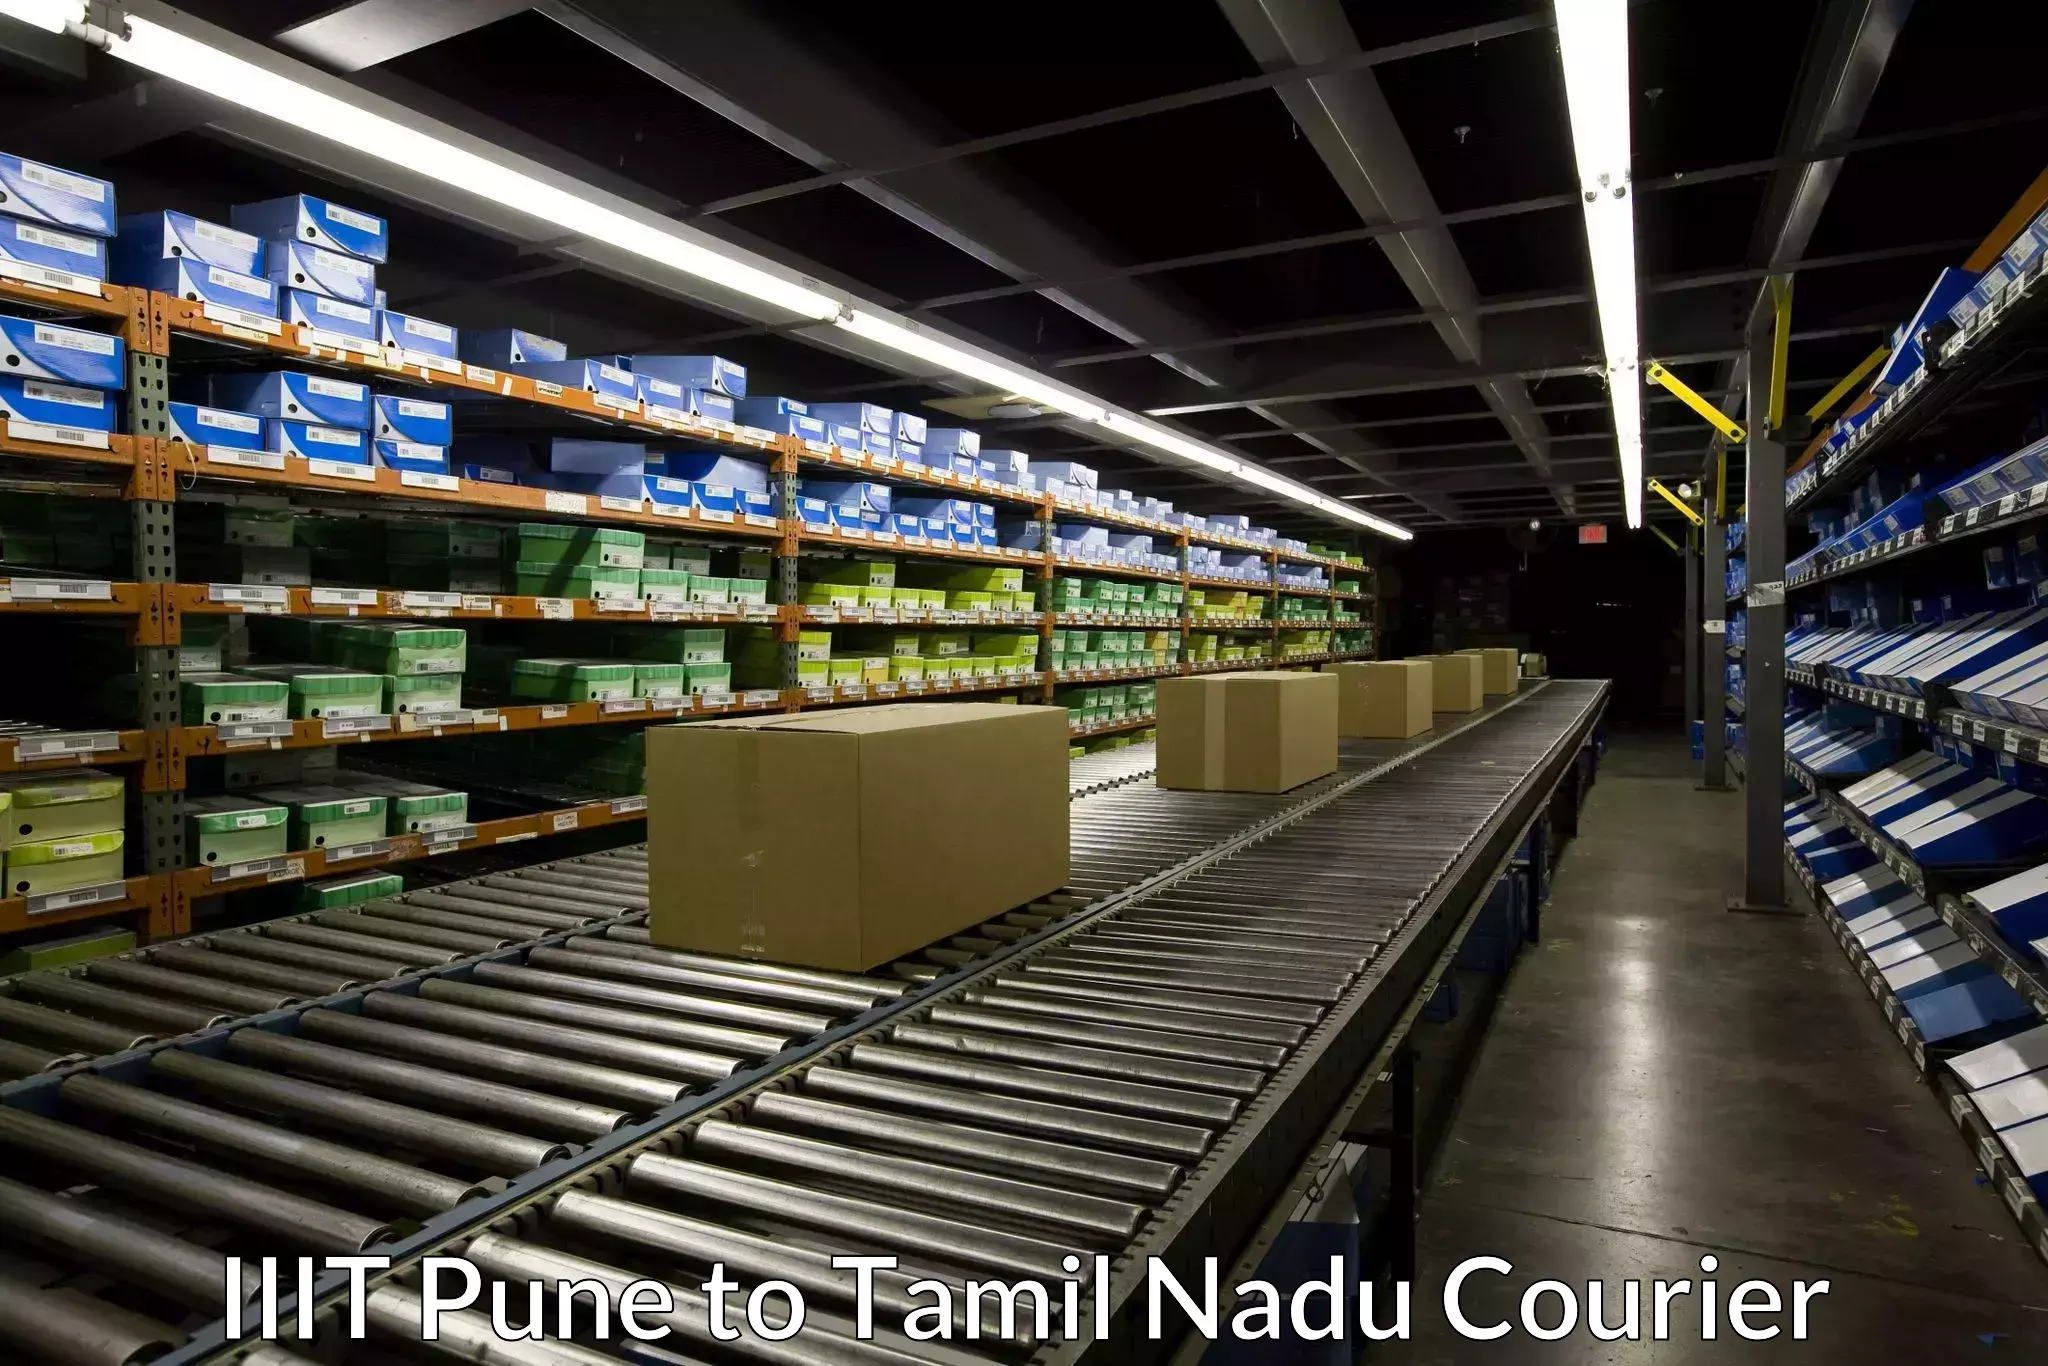 Courier services in IIIT Pune to Tamil Nadu